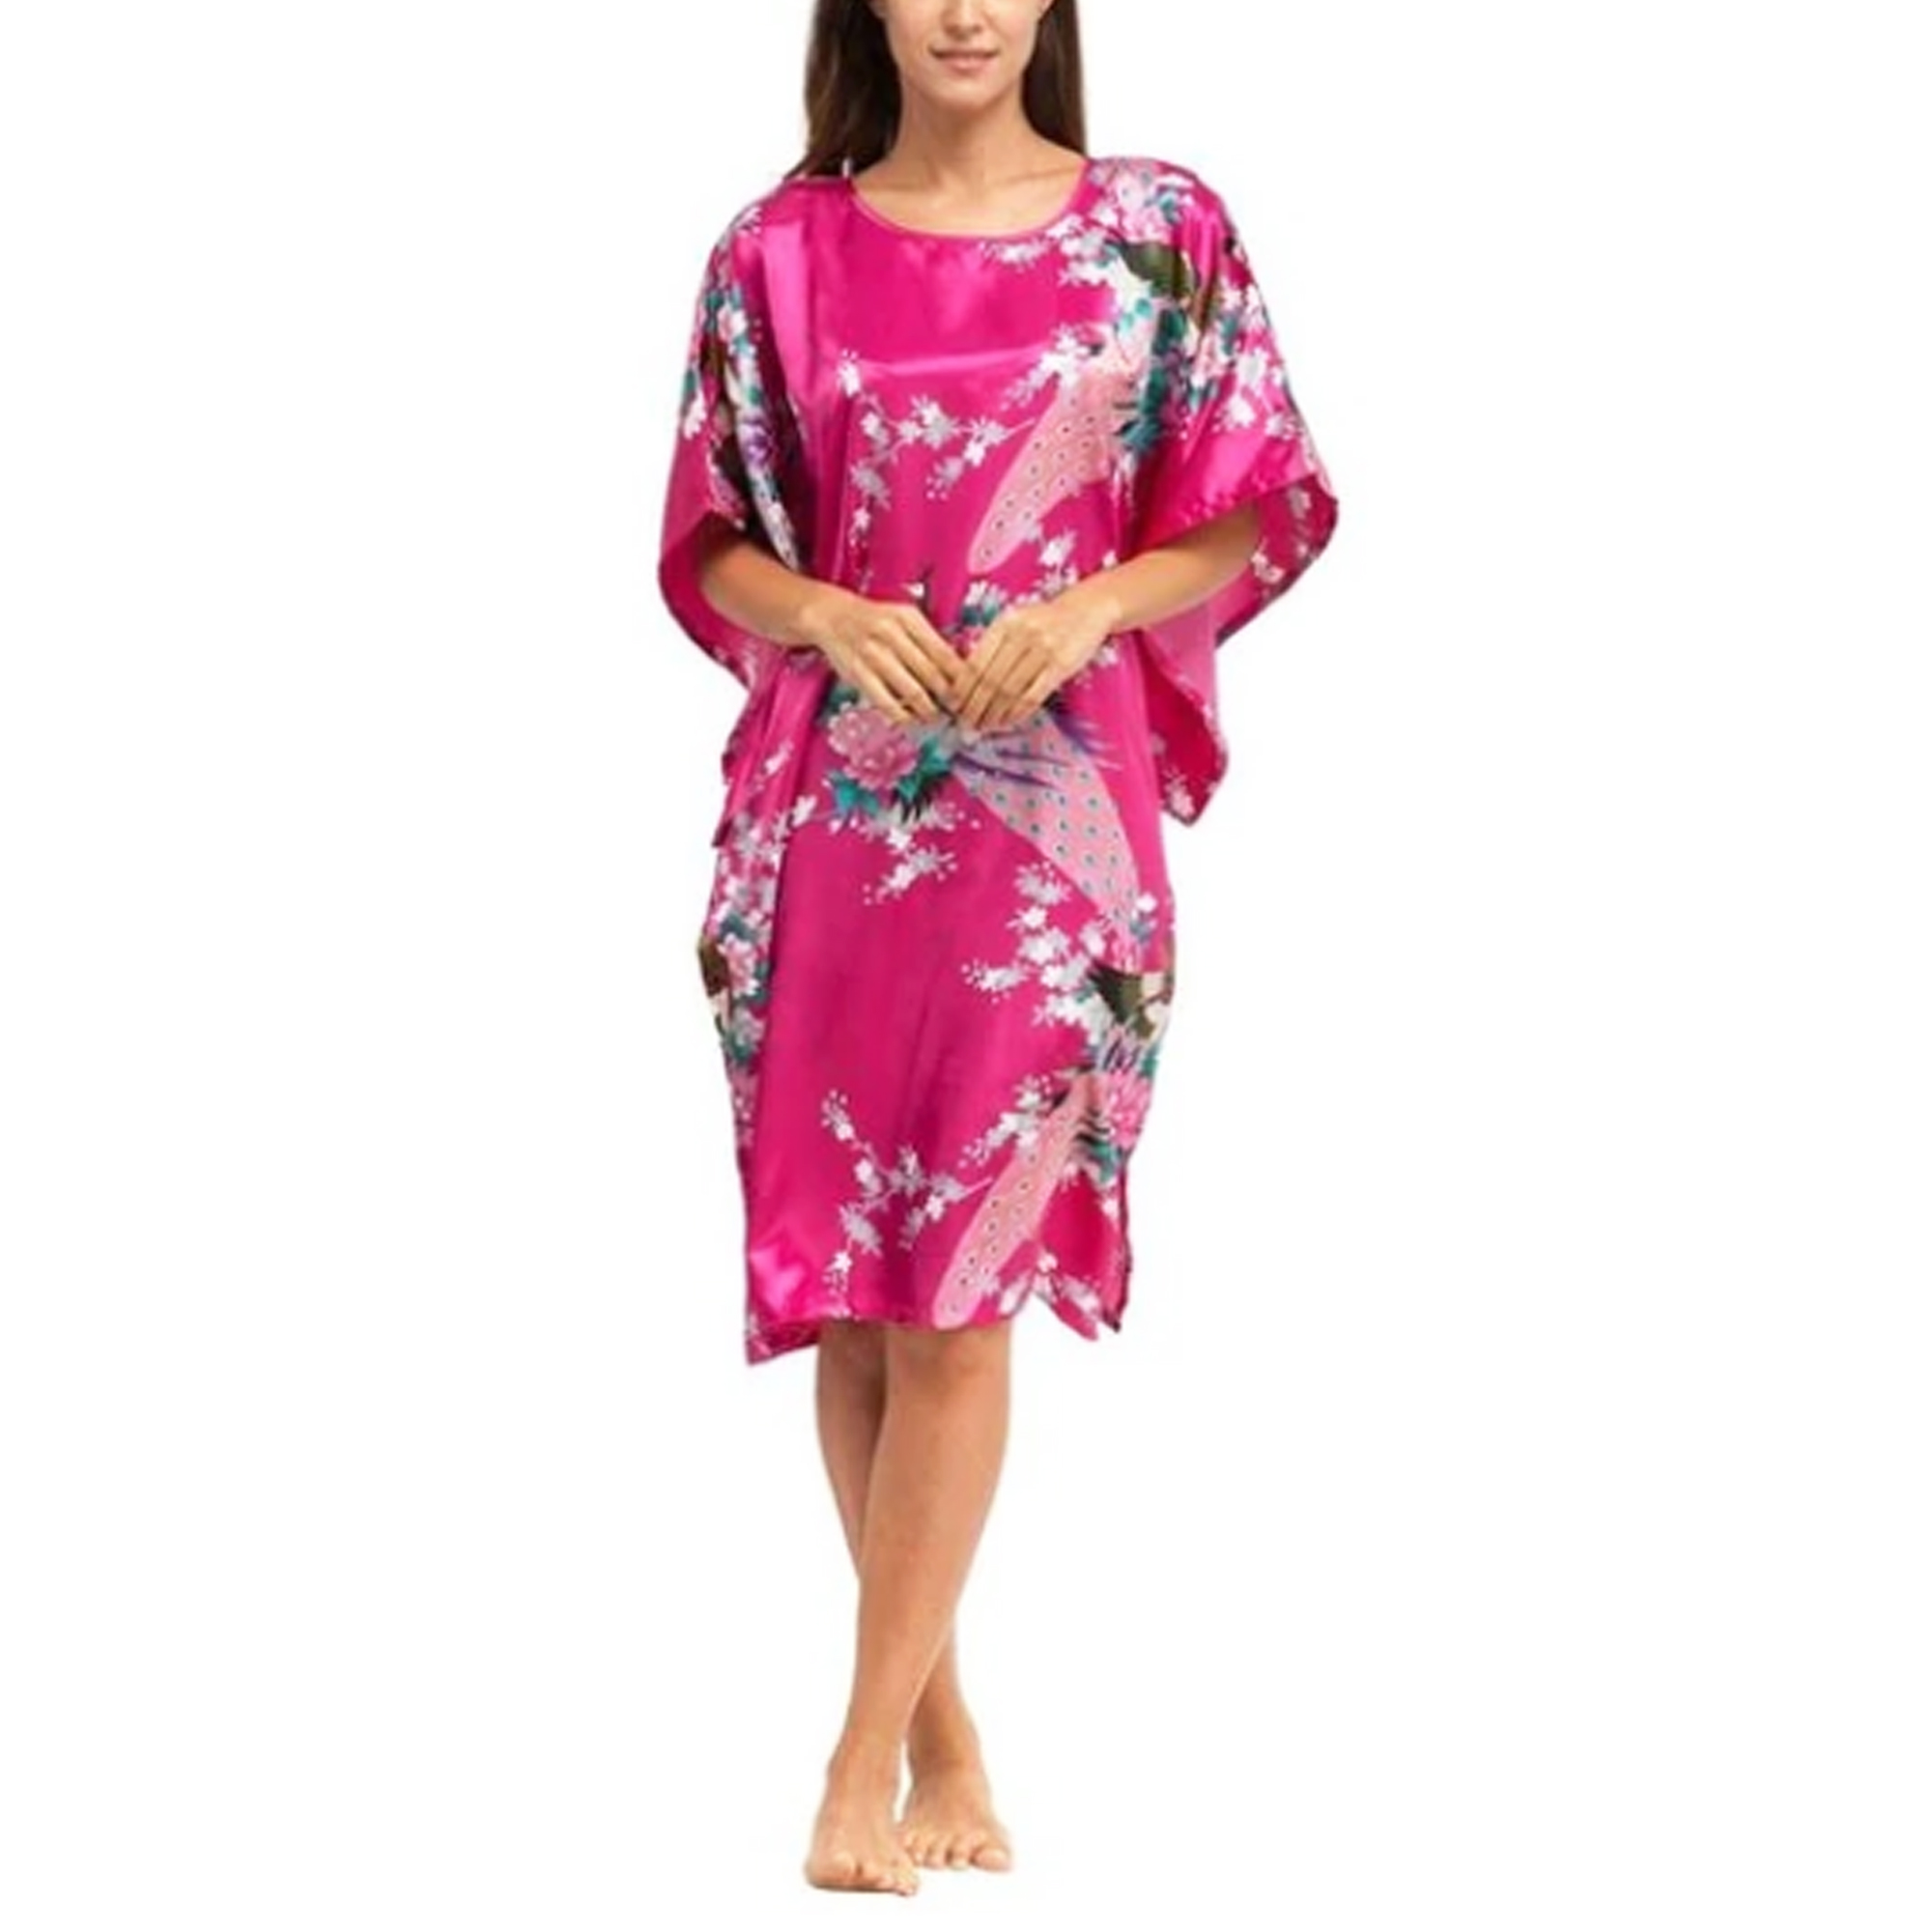 Gifts Are Blue Womens Satin Nightgown, Floral Print Kaftan Sleepwear, Fits up to 16/18